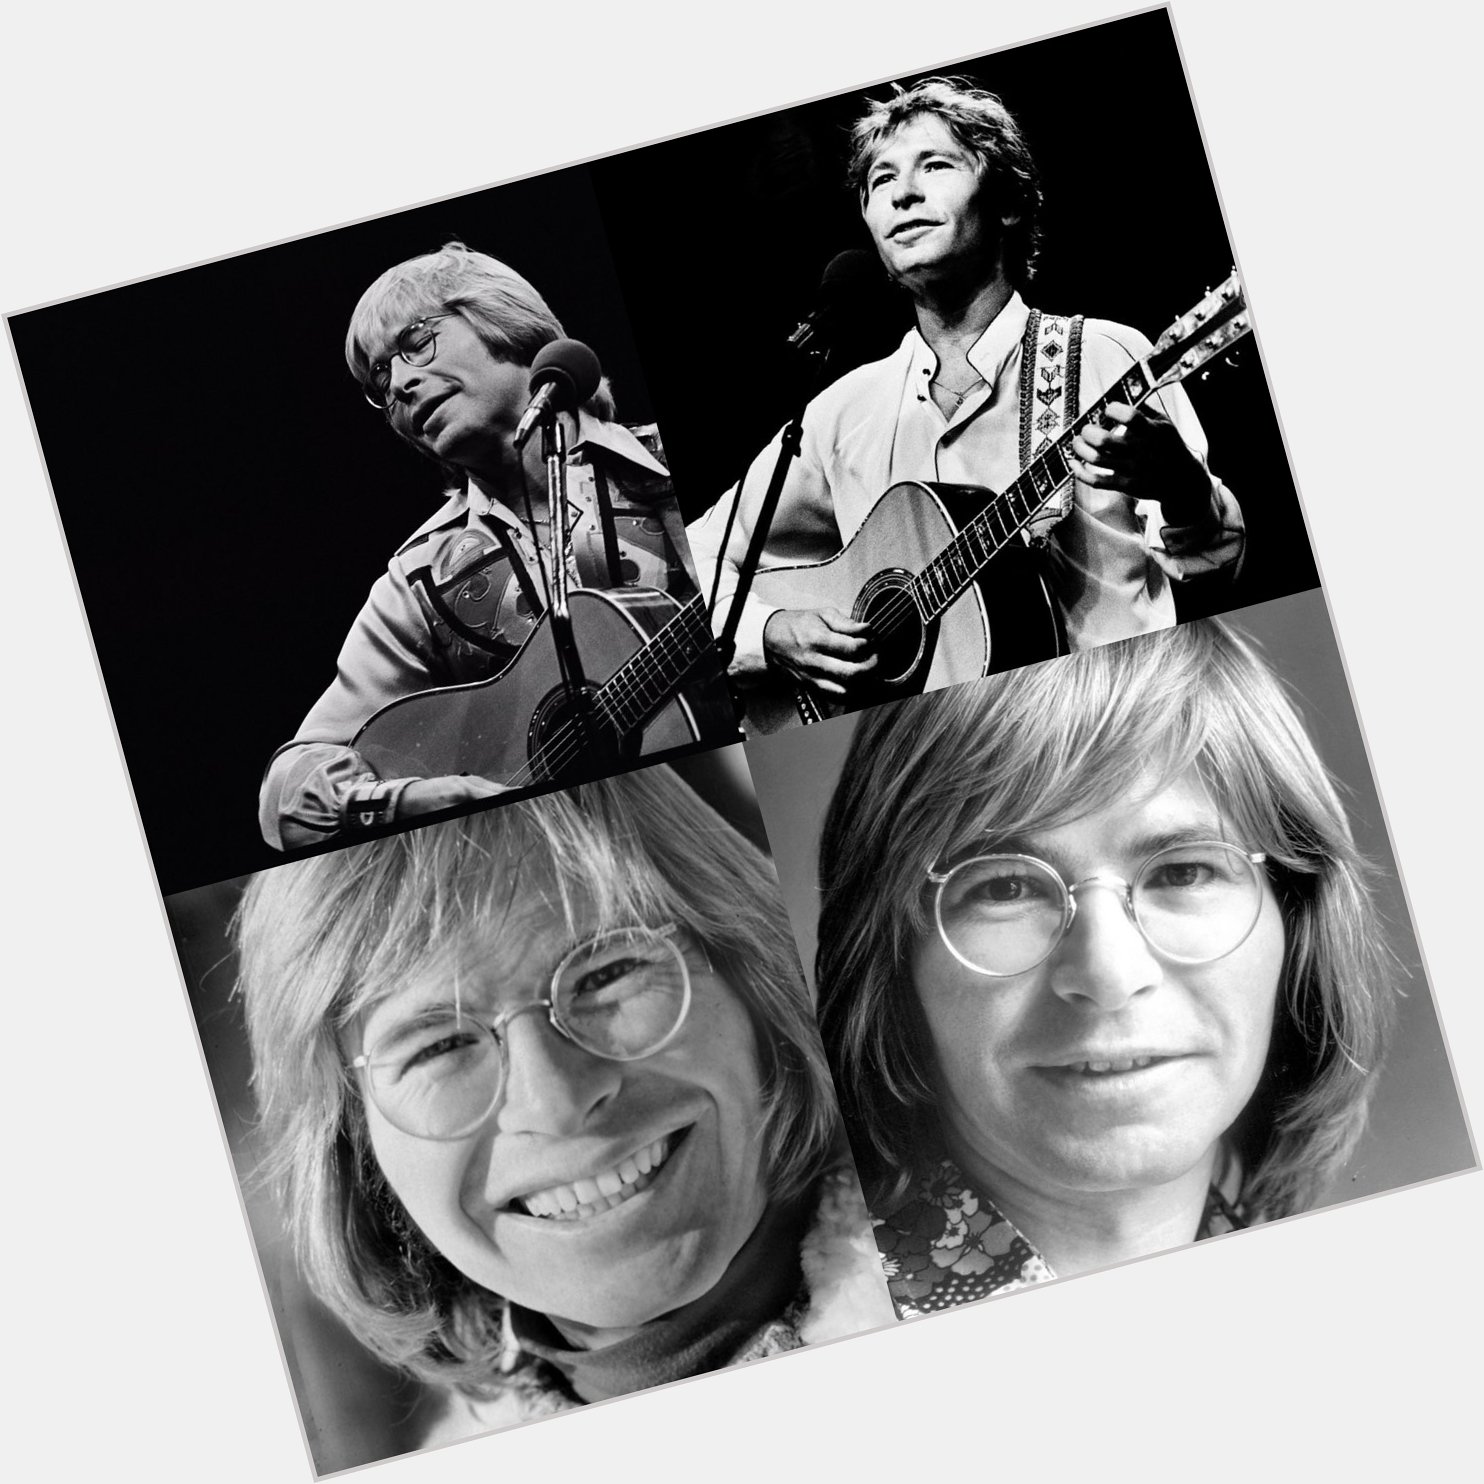 Happy 77 birthday to John Denver up in heaven. May he Rest In Peace.  